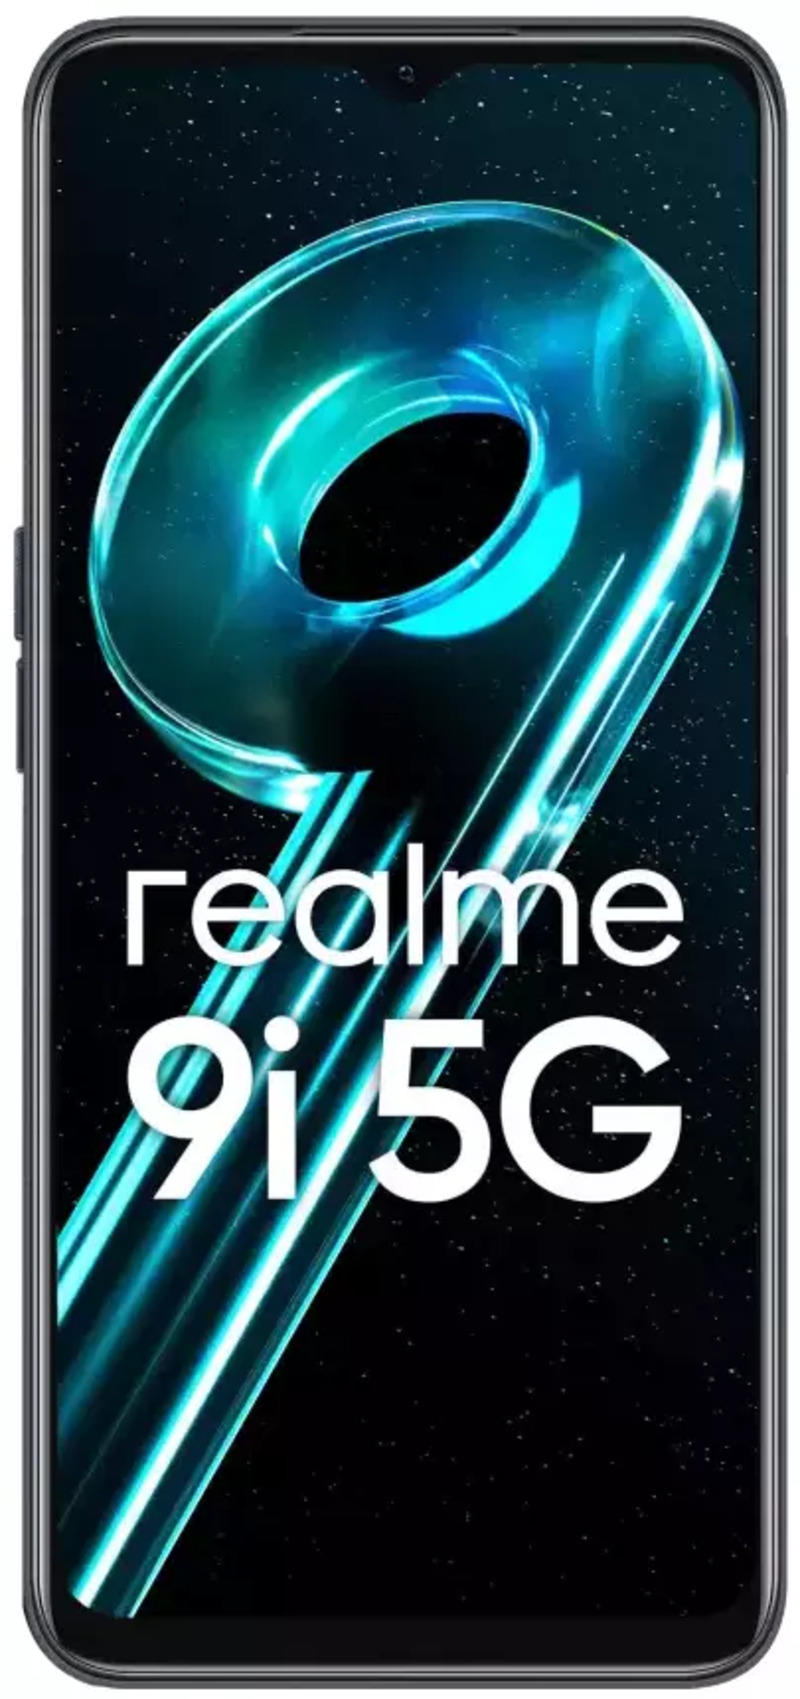 RealMe 9i 5G (50 MP Camera, 64 GB Storage) Price and features